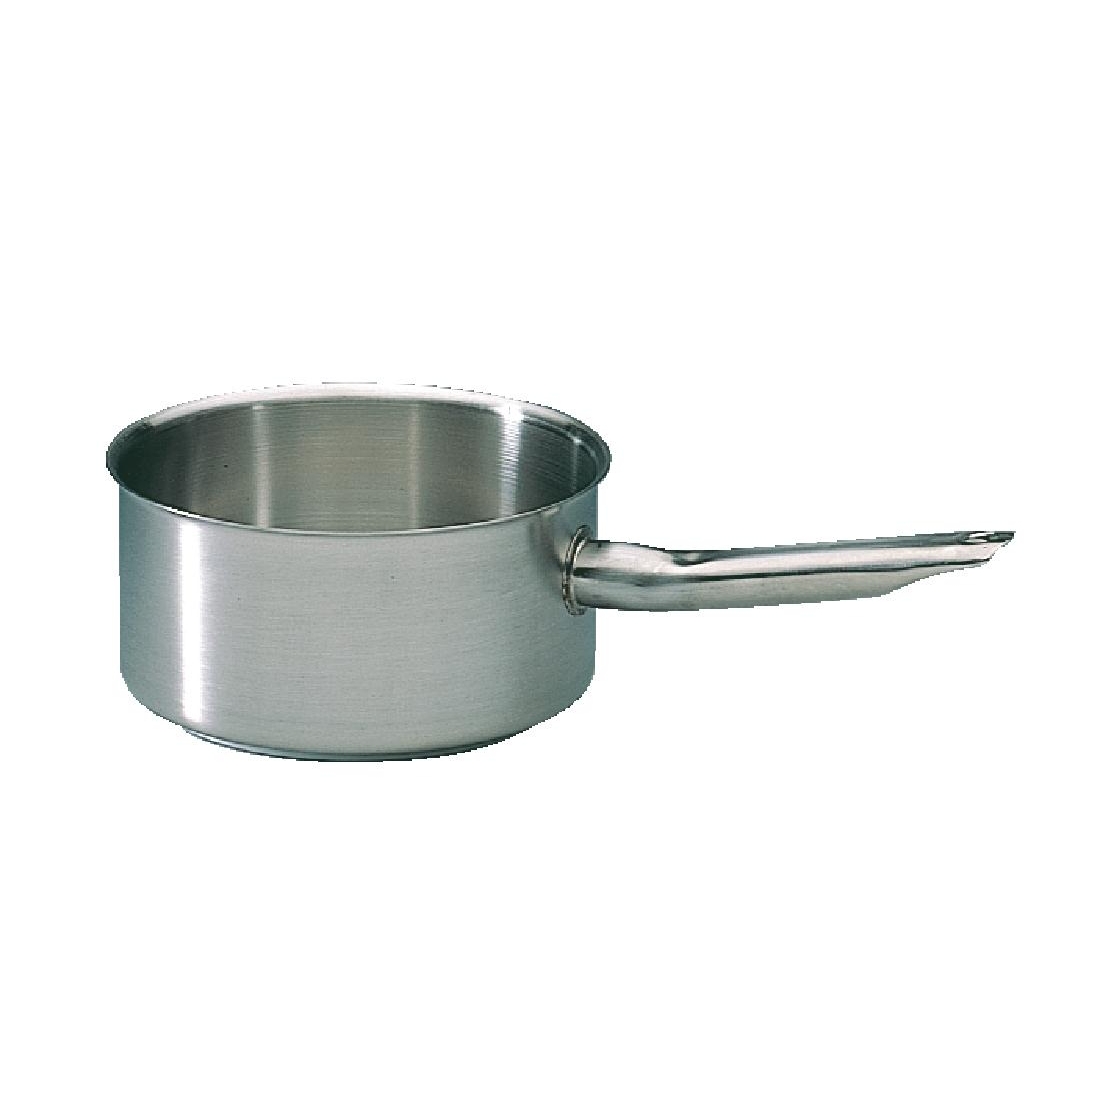 Bourgeat Stainless Steel Excellence Saucepan 1.6Ltr